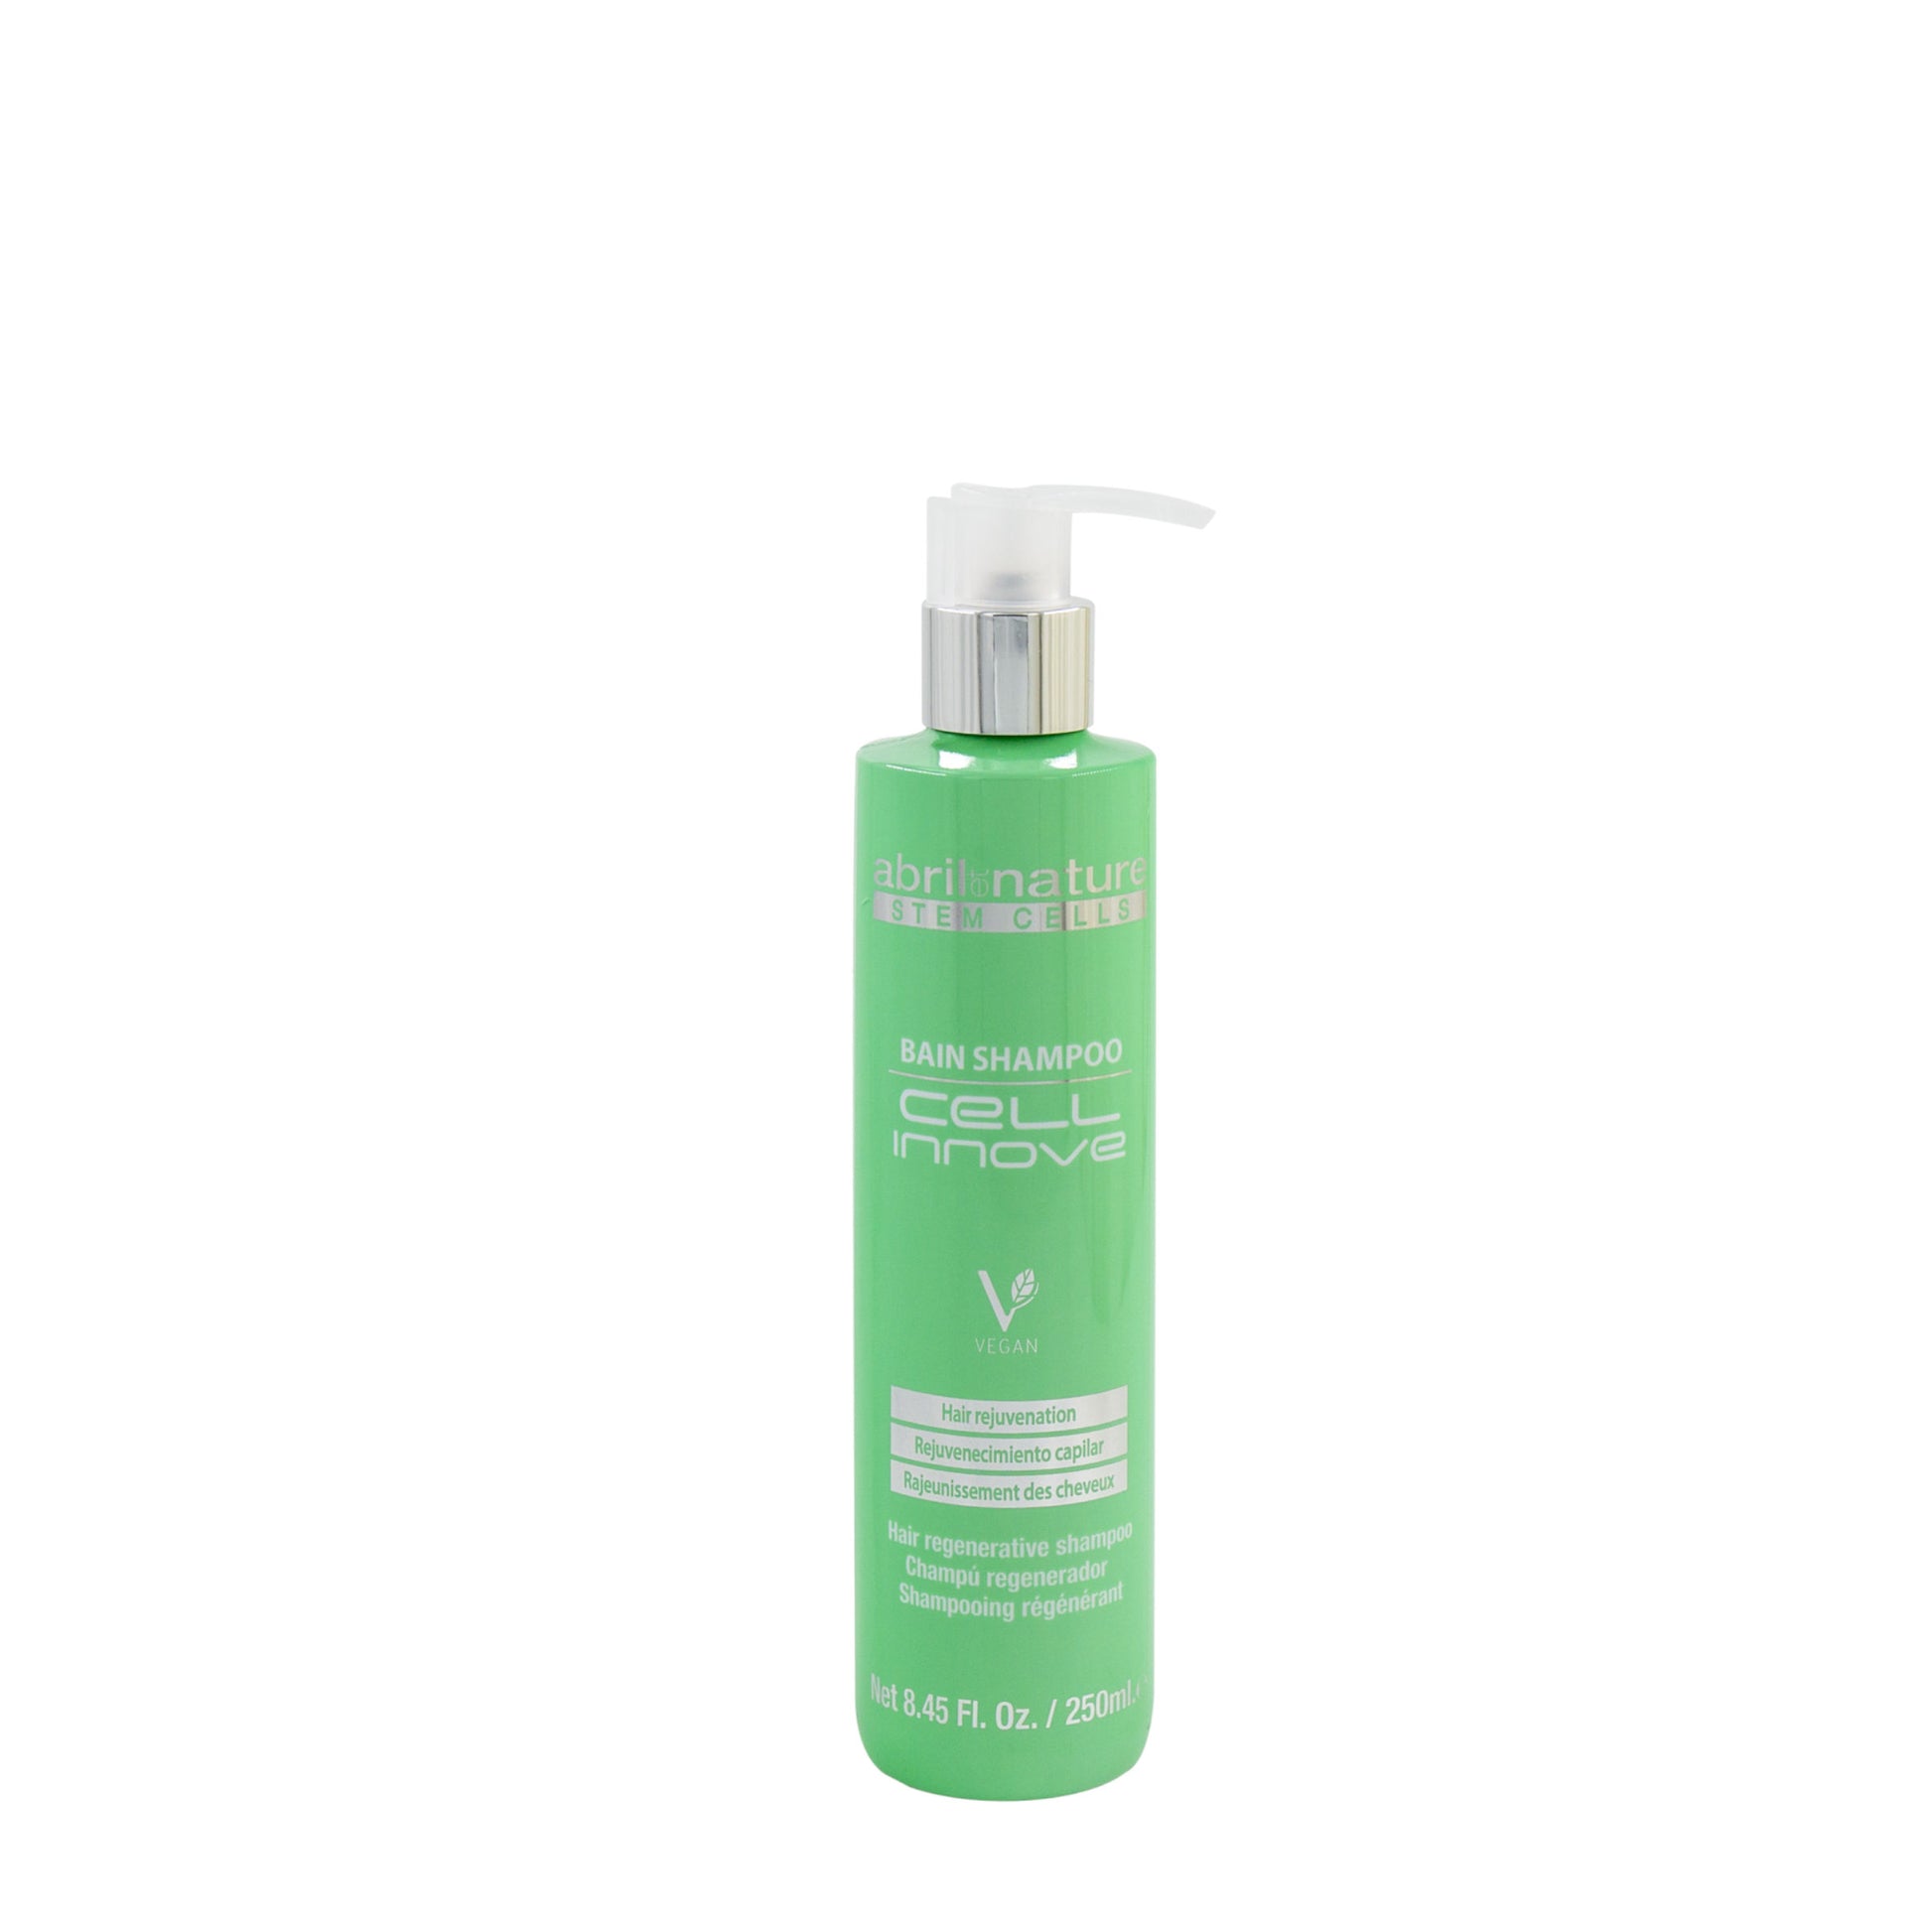 ABRIL ET NATURE CELL INNOVE SHAMPOO 250ML